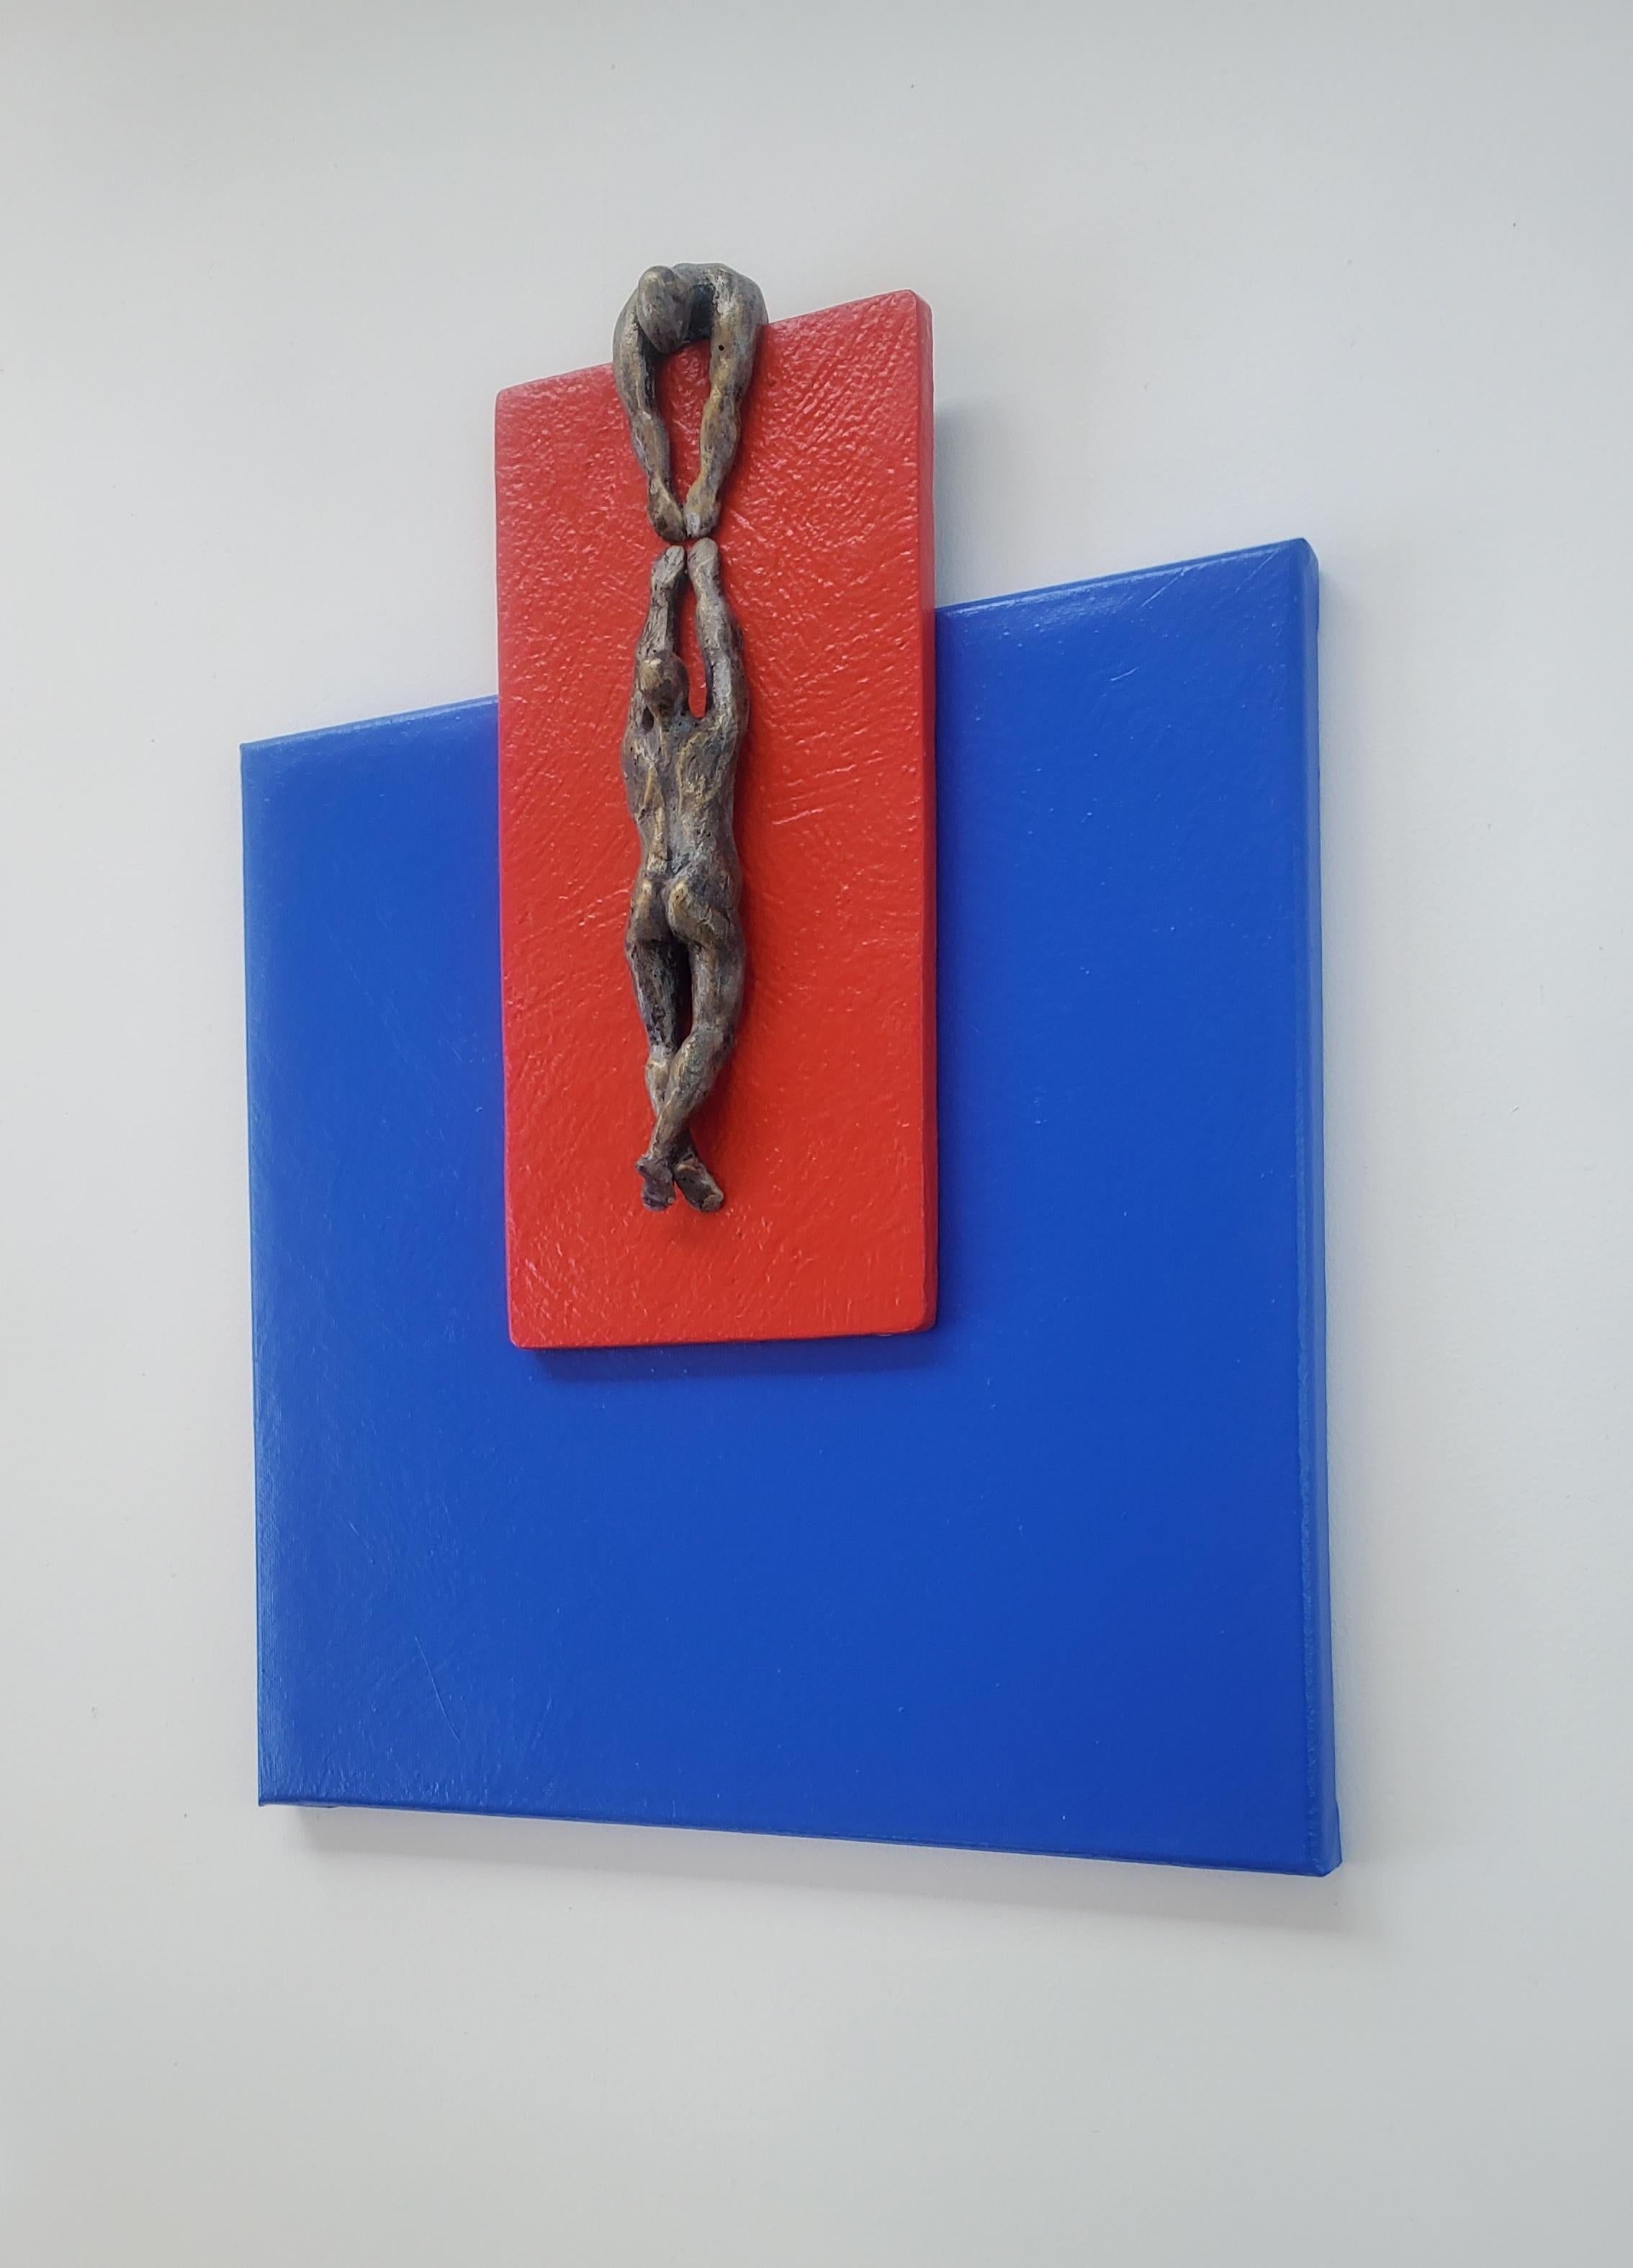 Climber on Red N Blue Square. , Original Painting - Contemporary Mixed Media Art by Yelitza Diaz